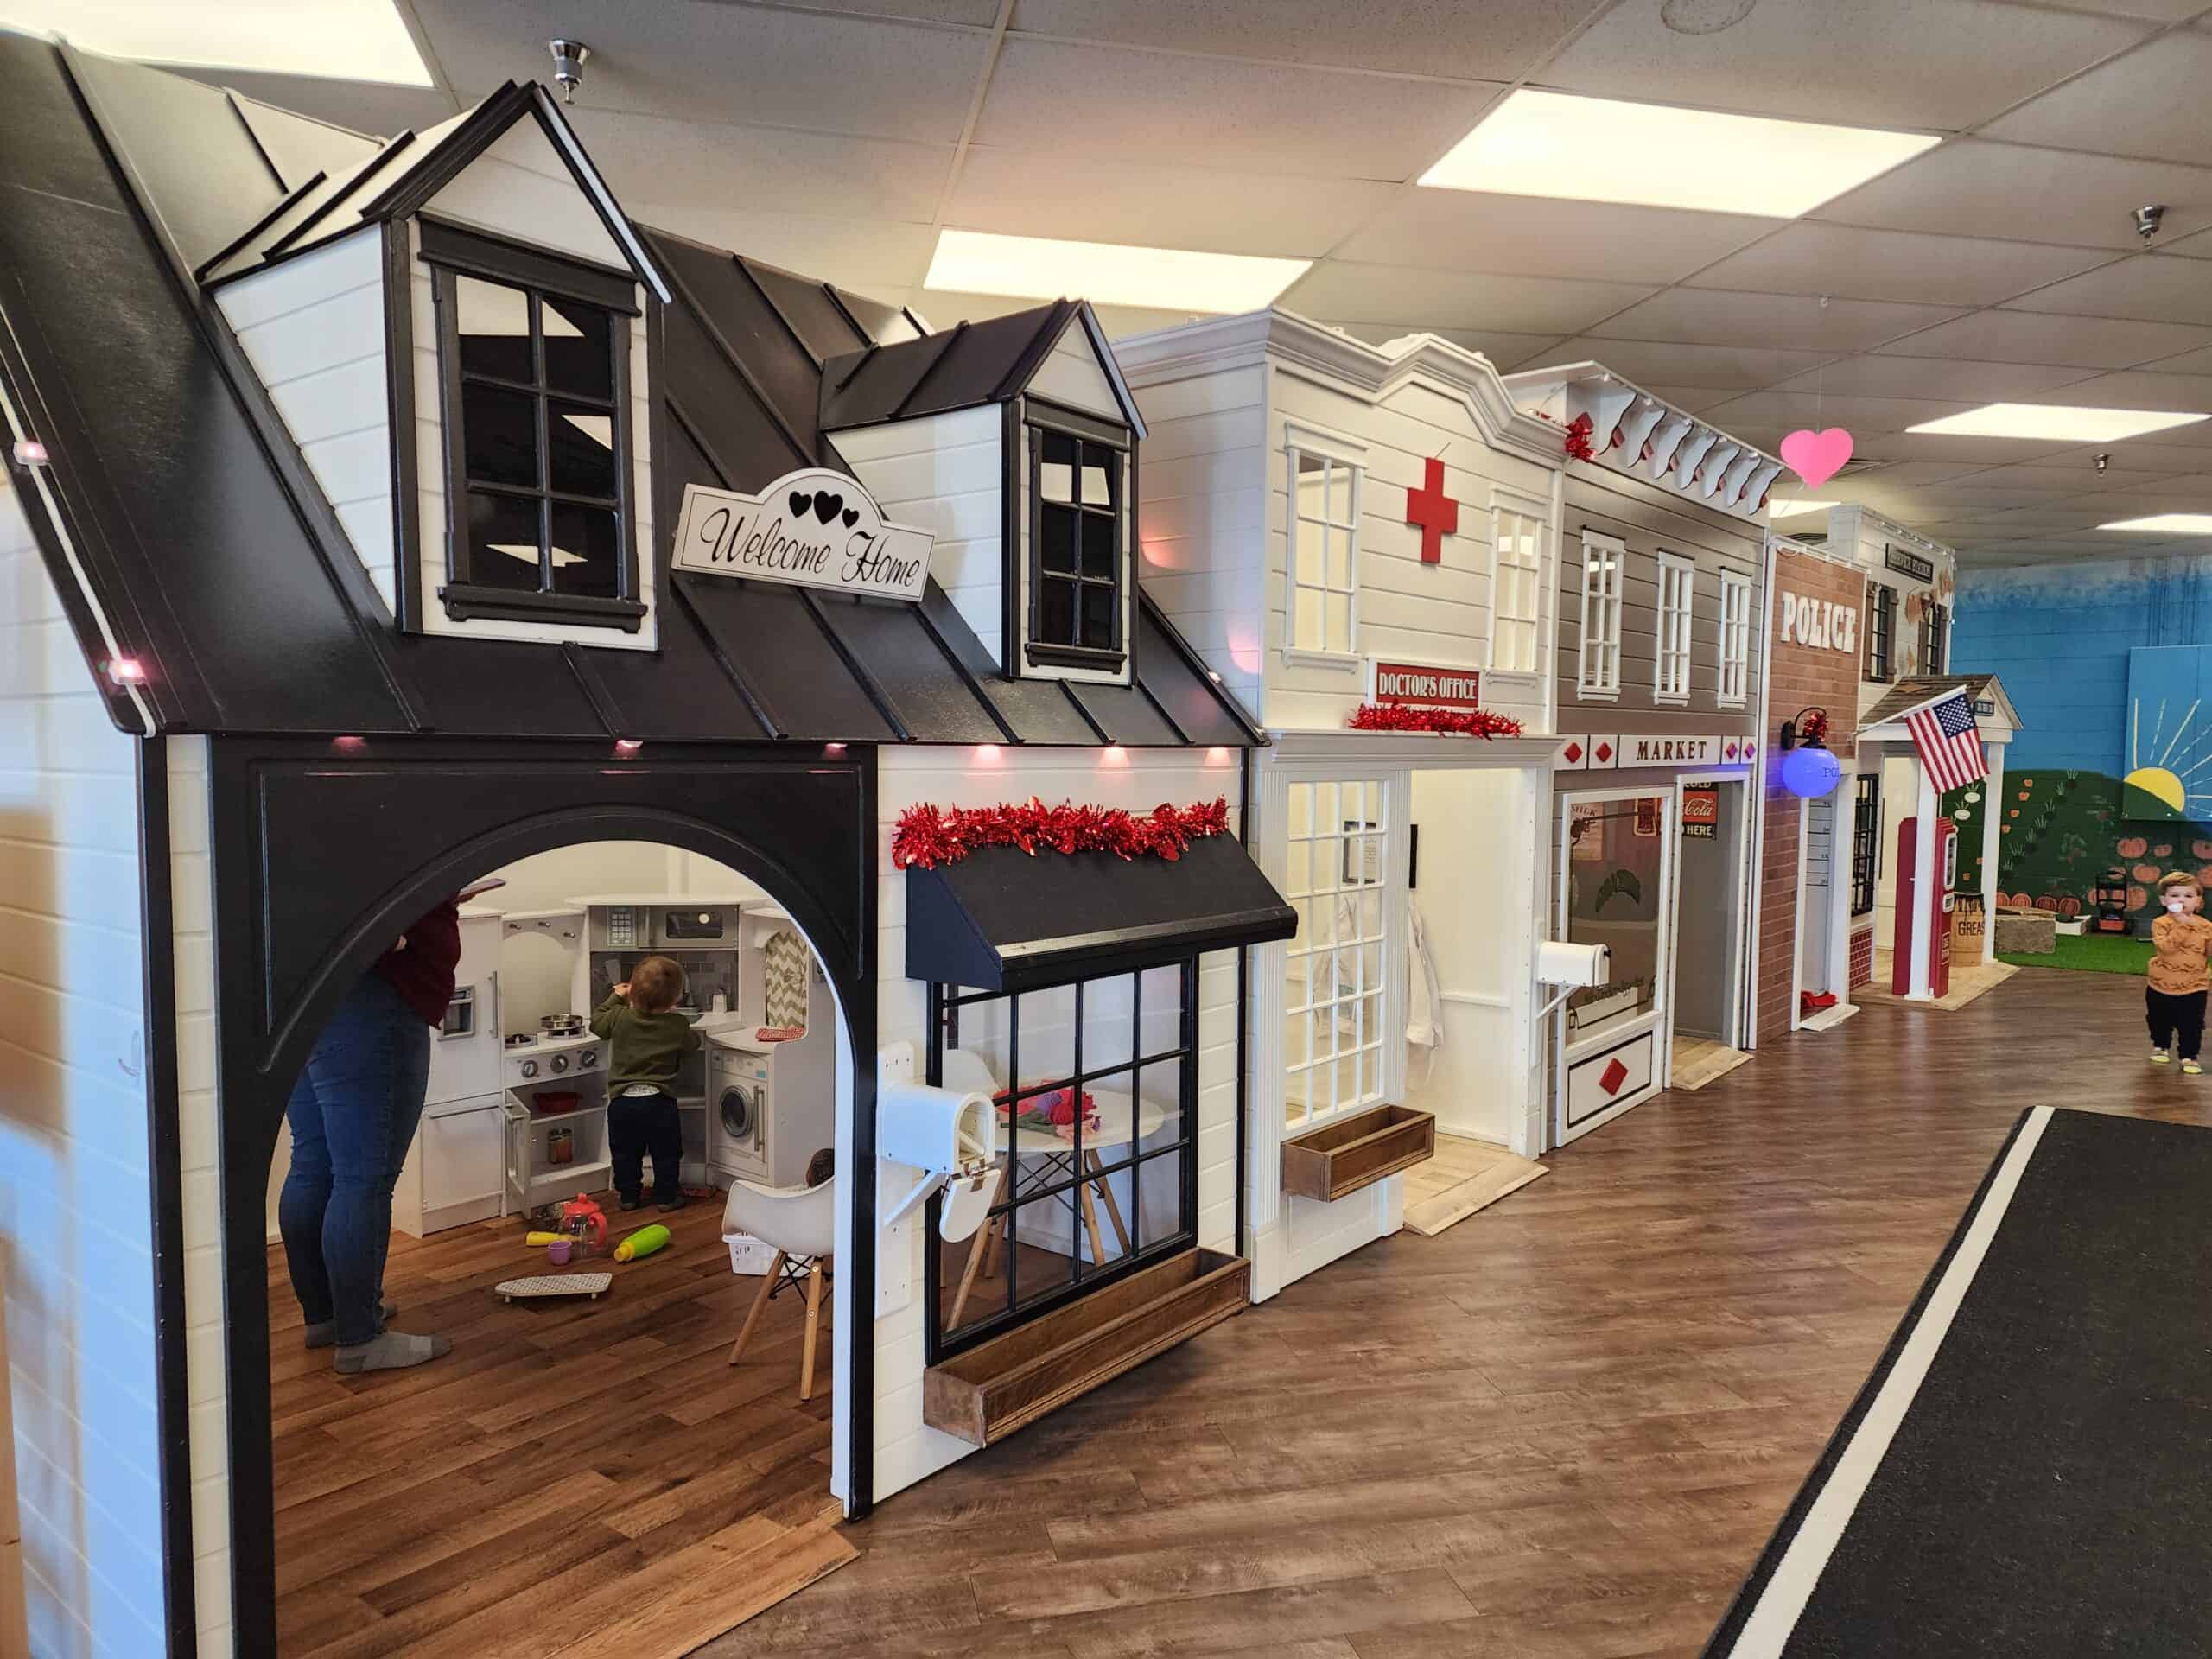 Interactive play area inside Piney Town Playhouse in Fuquay-Varina, NC, with a black playhouse featuring a 'Welcome Home' sign and a child playing in a realistic kitchen setup. Nearby are a doctor's office and a police station, all designed for educational play in a vibrant, small-scale town setting